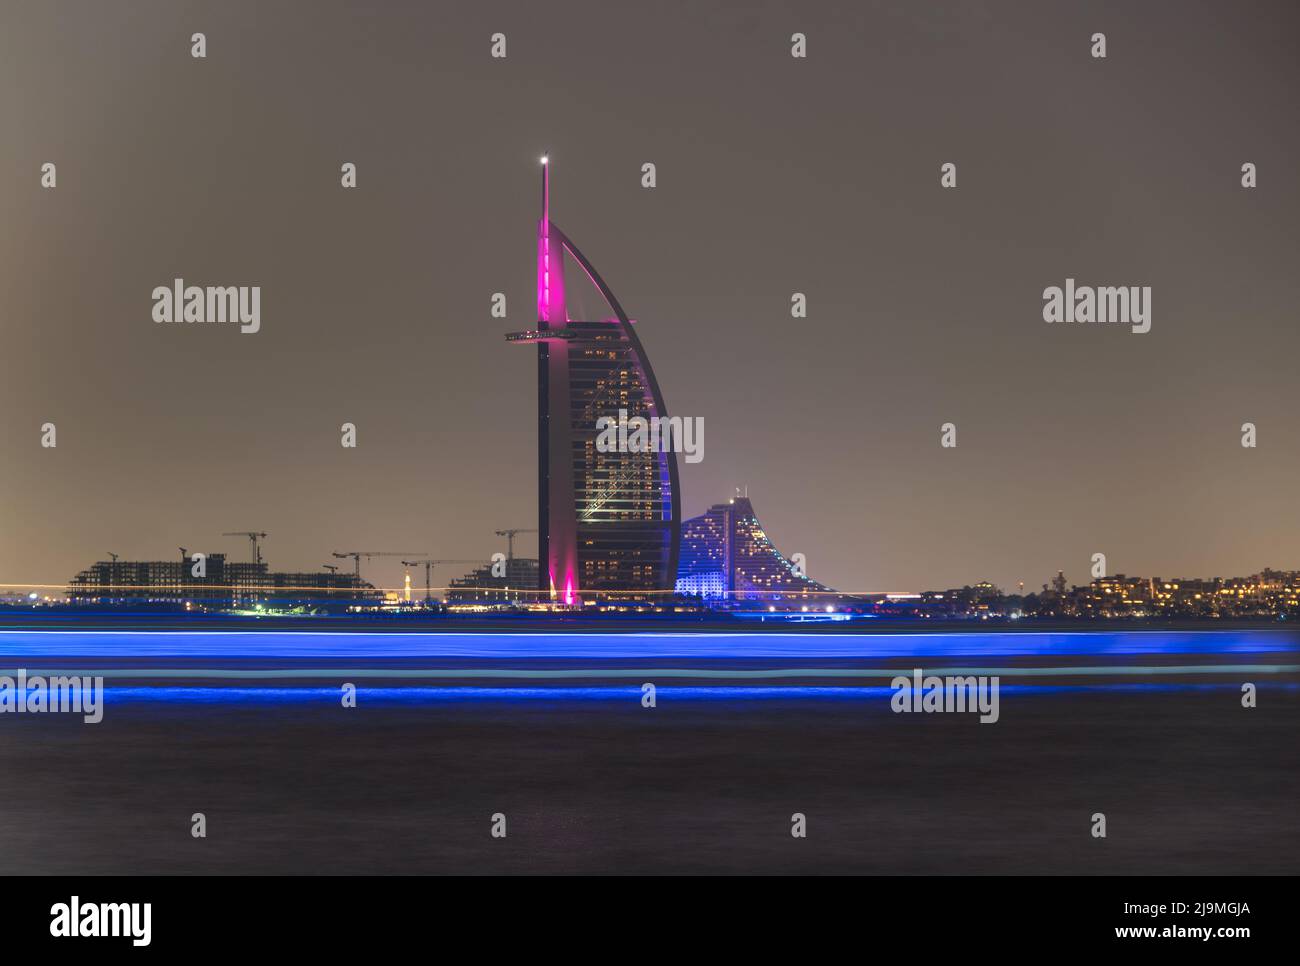 View of the illuminated Burj Al Arab, the iconic 7 star hotel in Dubai captured from the Palm Jumeirah . Stock Photo